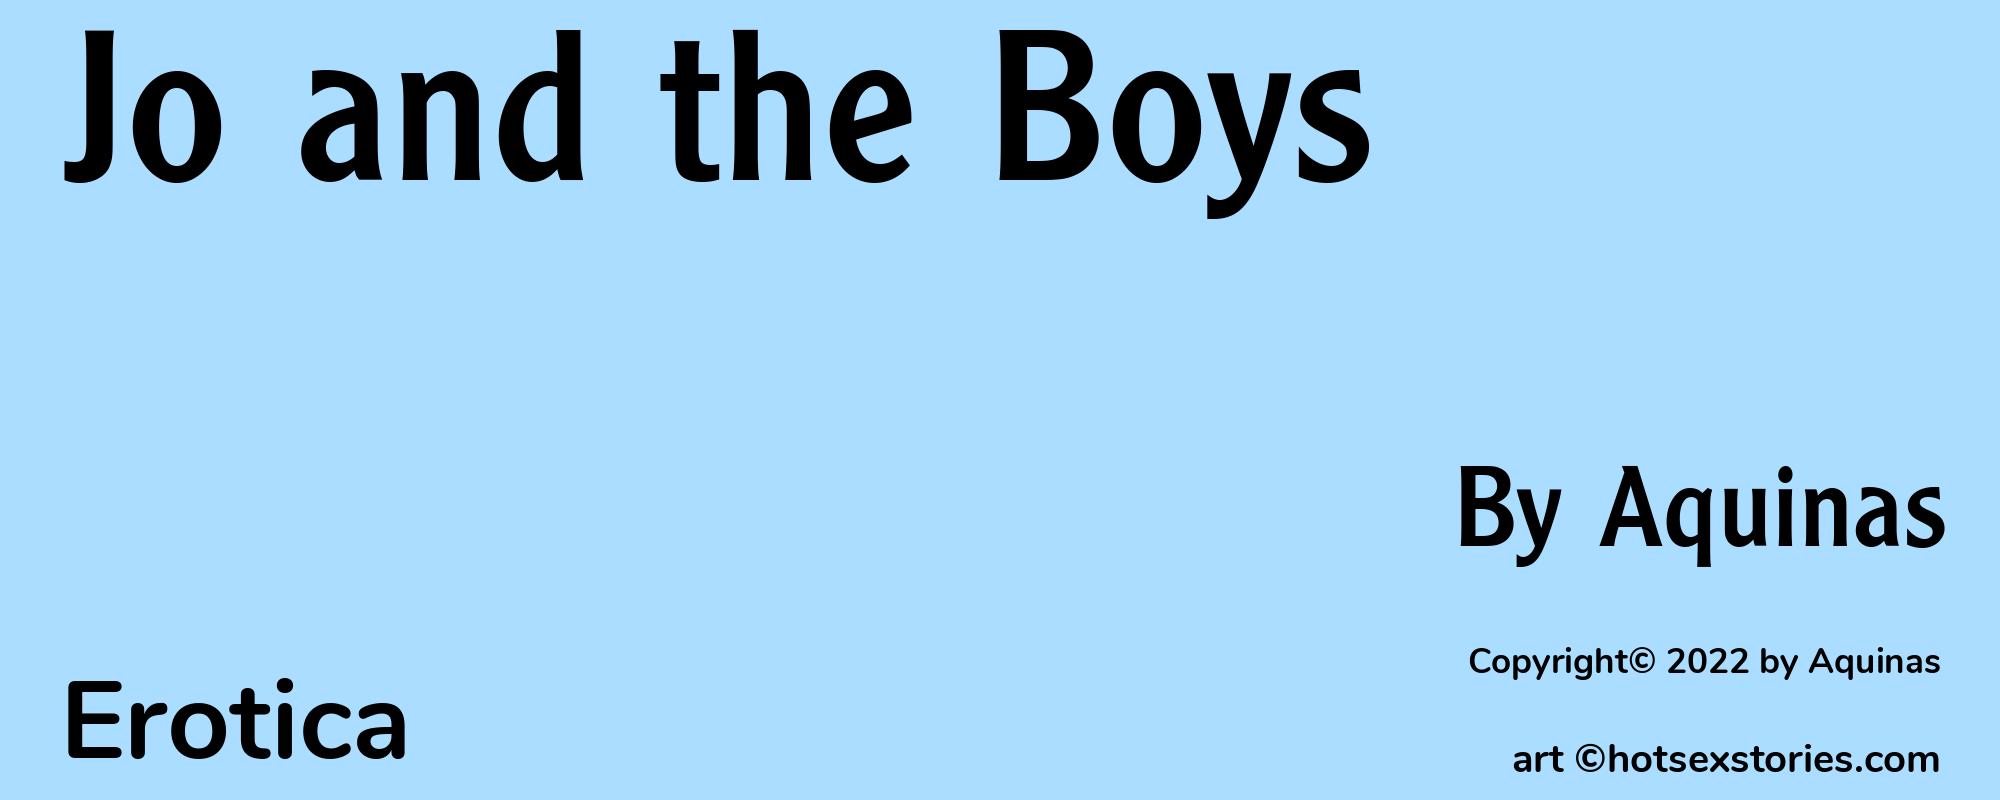 Jo and the Boys - Cover